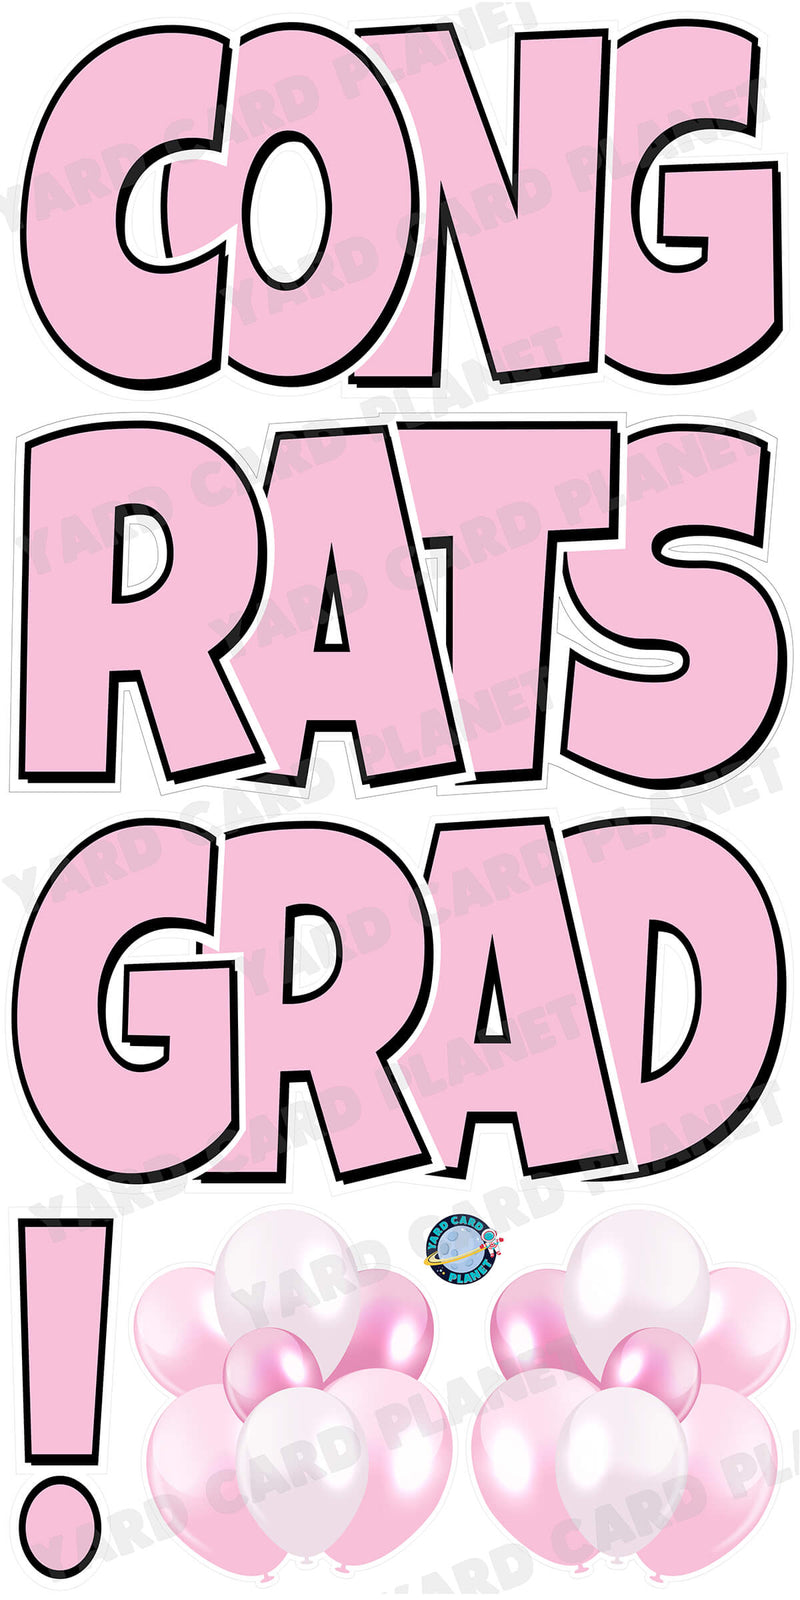 Large 23.5" Congrats Grad! Yard Card EZ Quick Sets in Luckiest Guy Font in Solid Colors - (Available in Multiple Colors)